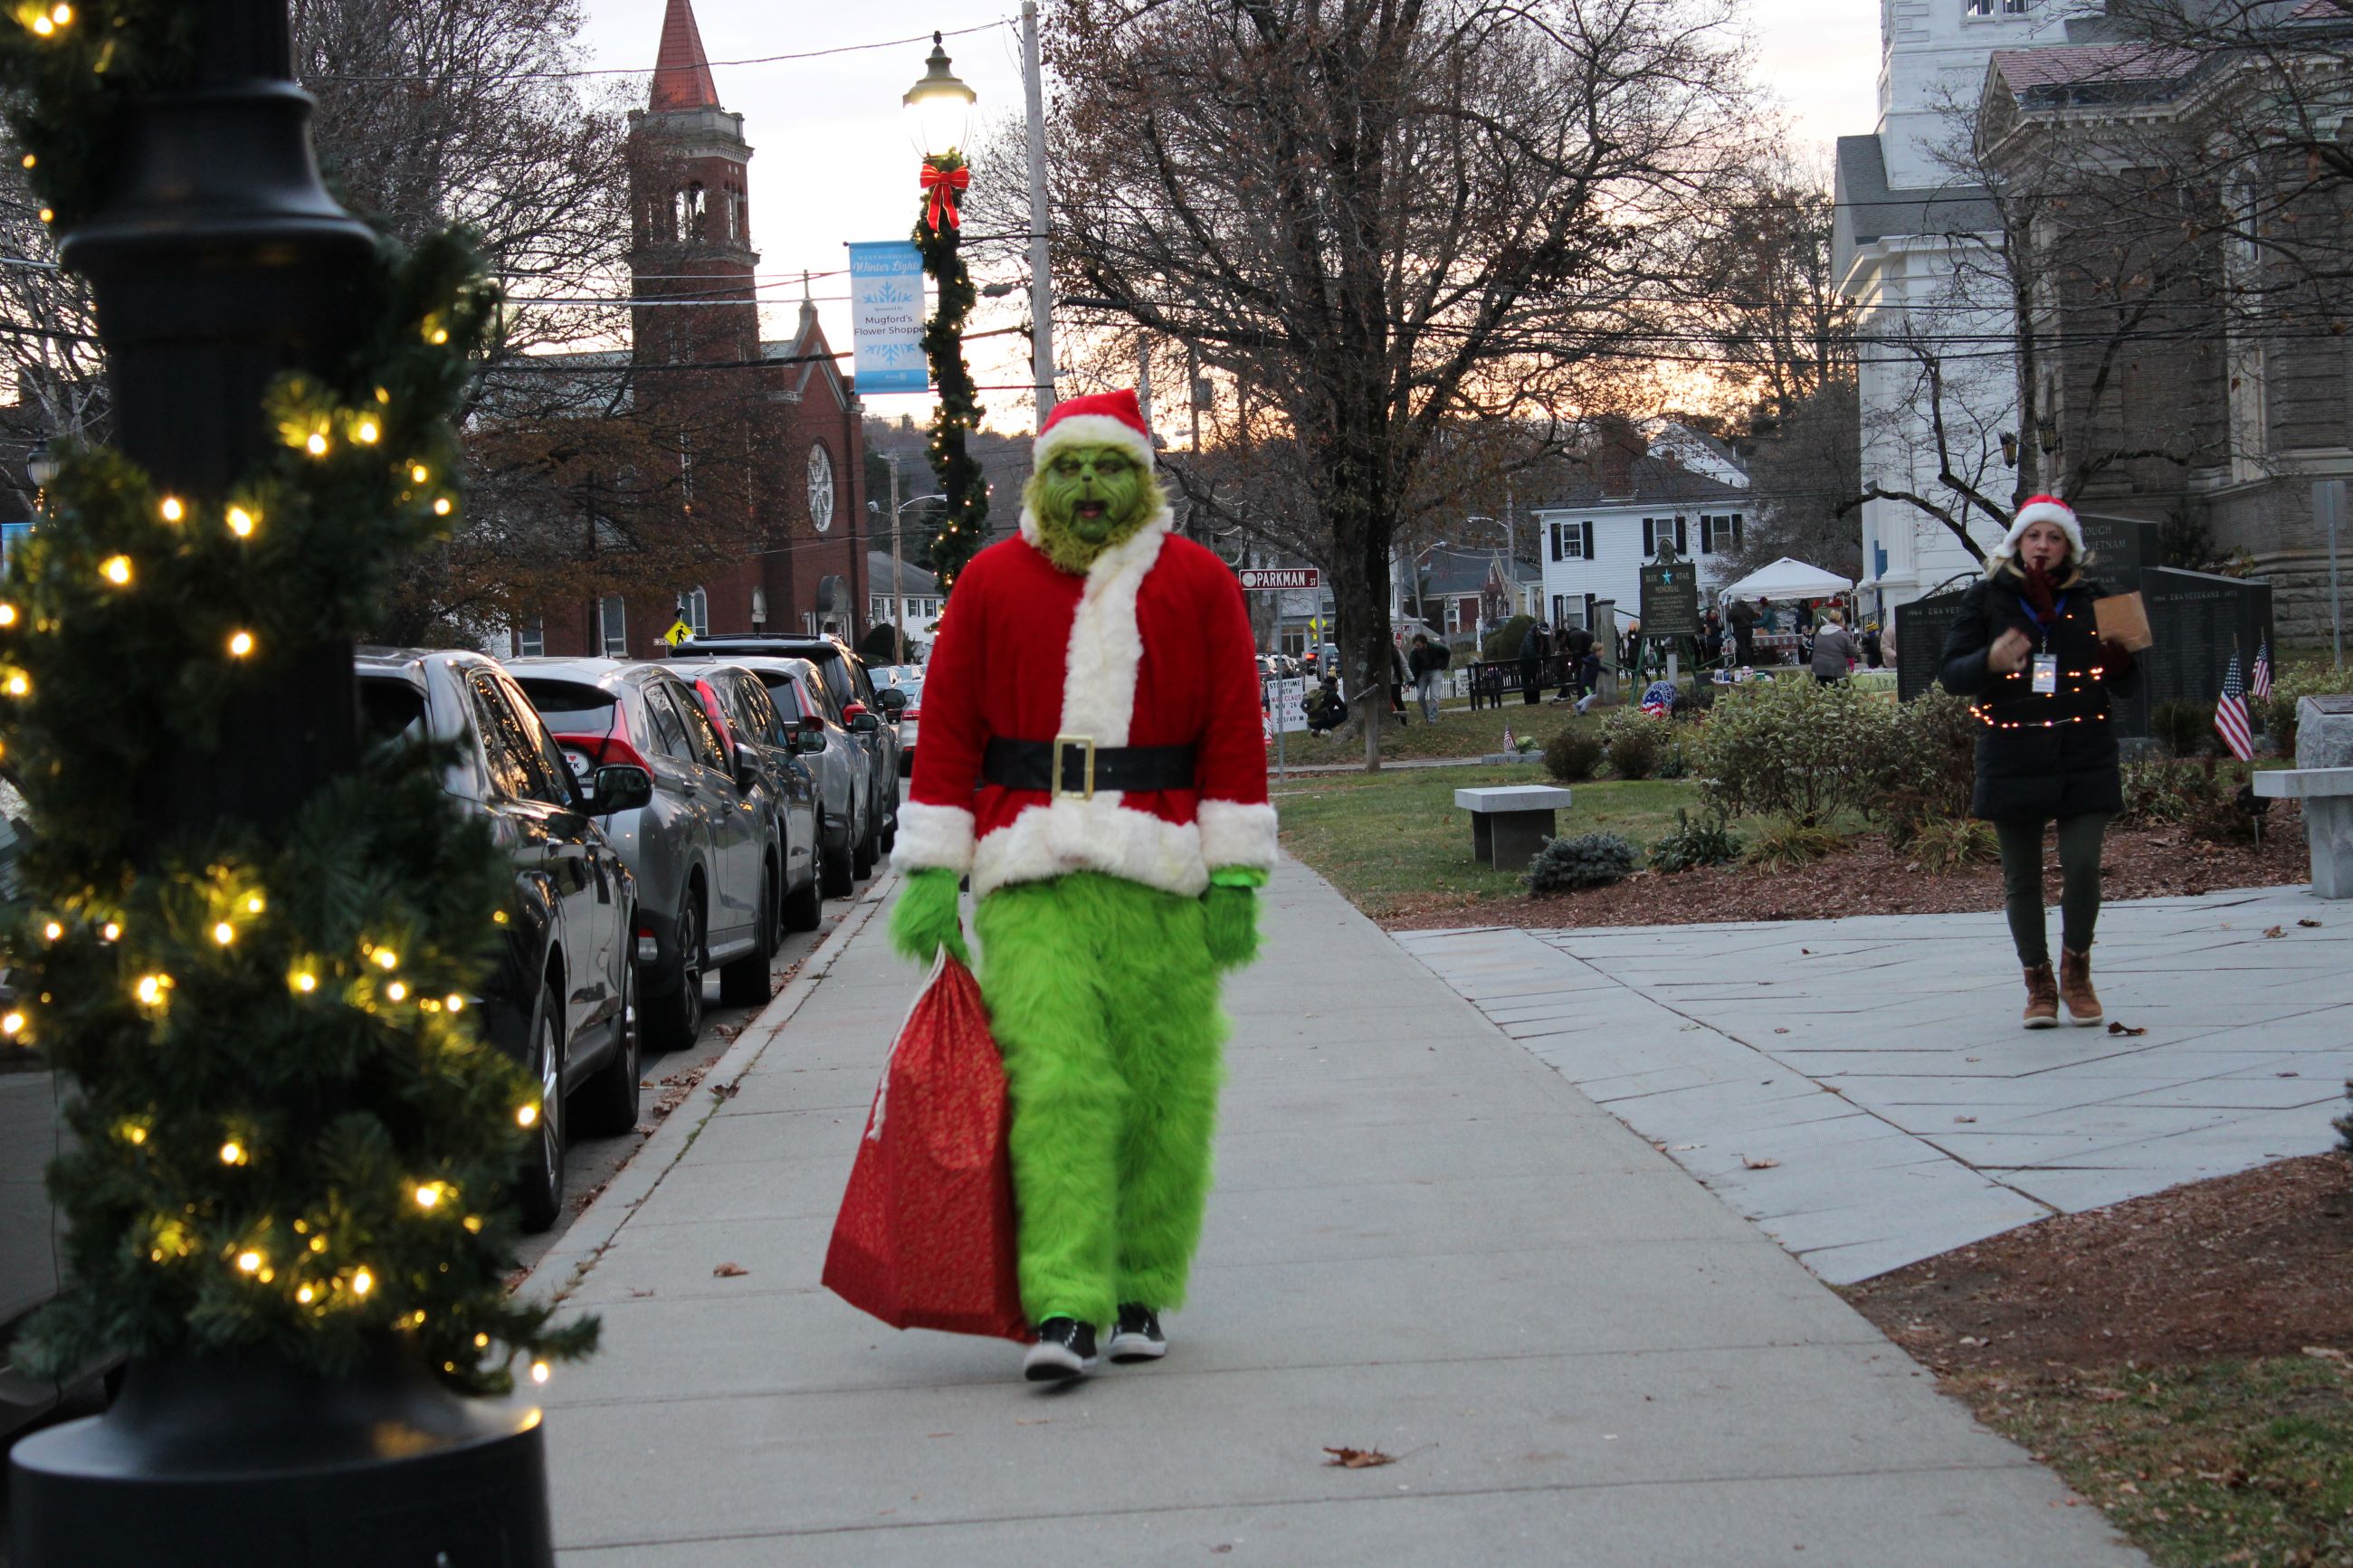 Westborough welcomes the holiday season with Winter Stroll